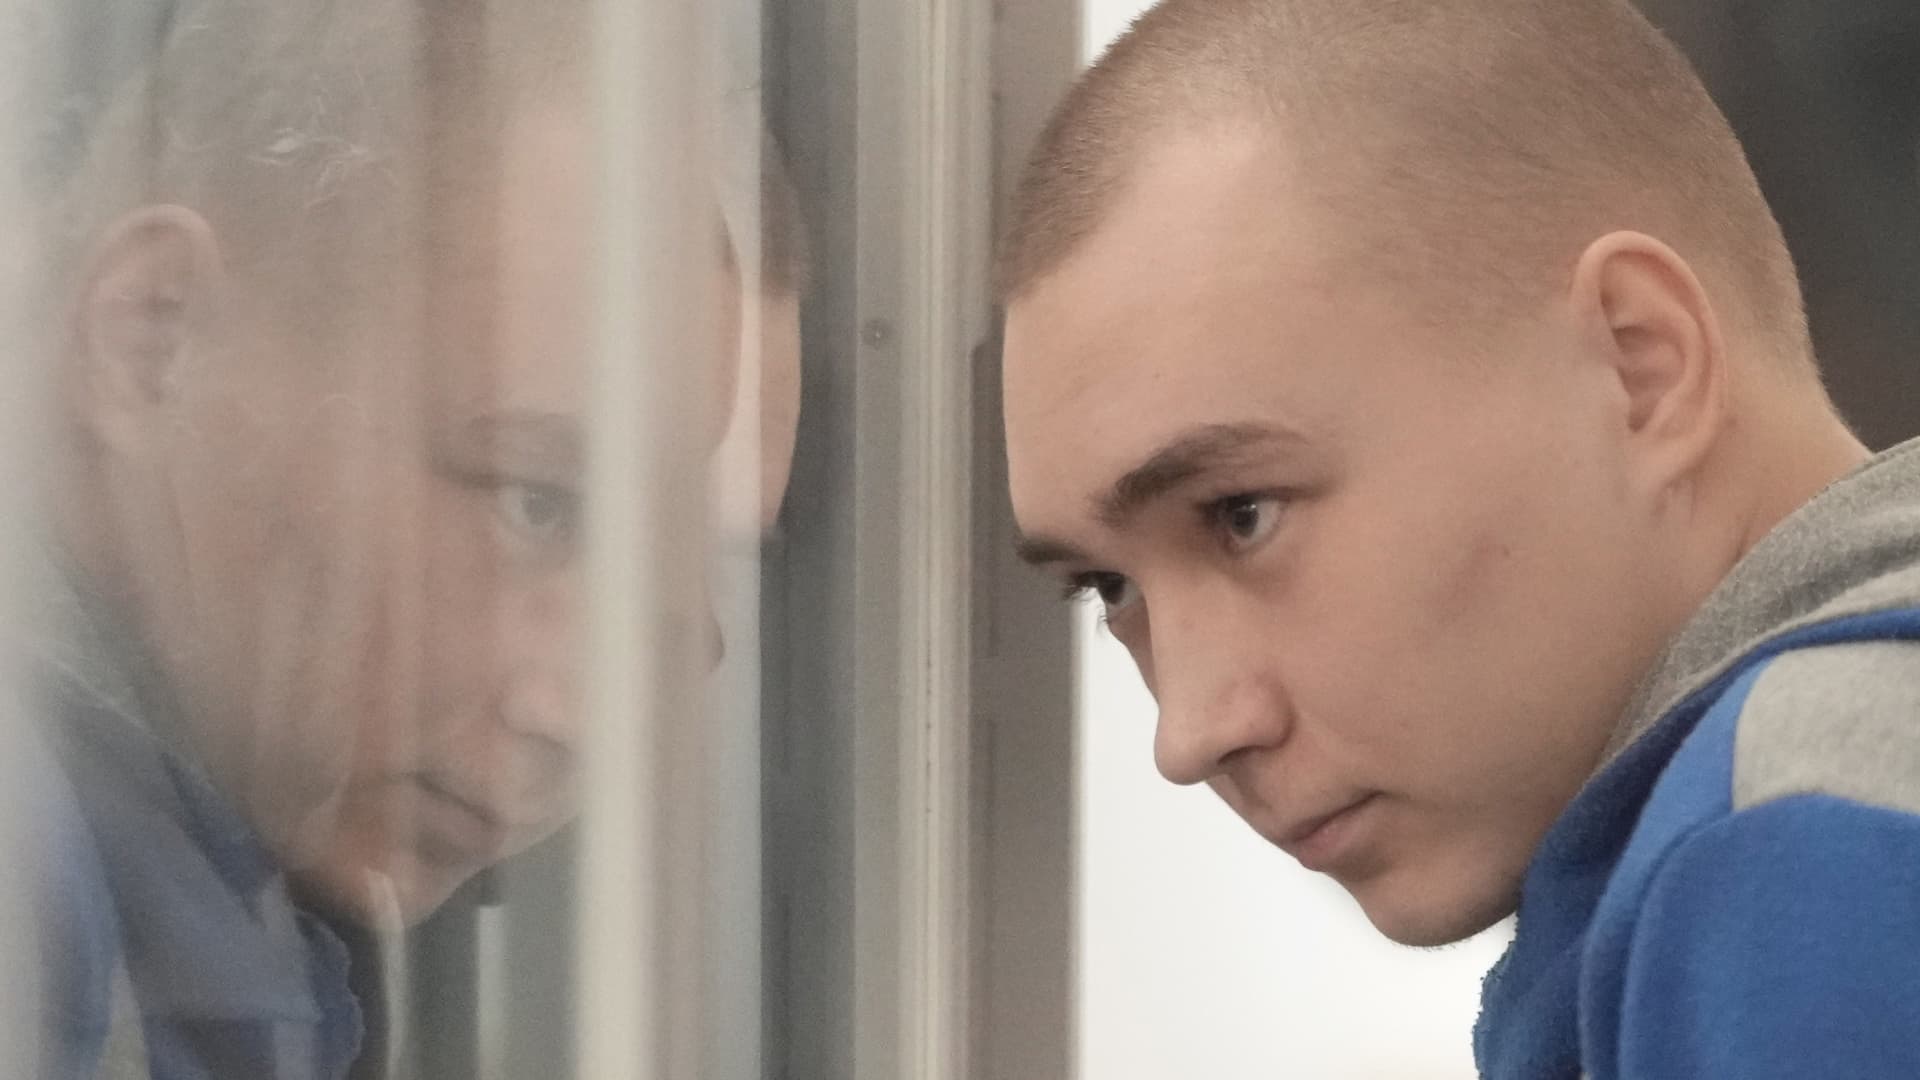 Sgt. Vadim Shishimarin of the Russian army appears at a sentencing hearing on May 23, 2022 in Kyiv, Ukraine.